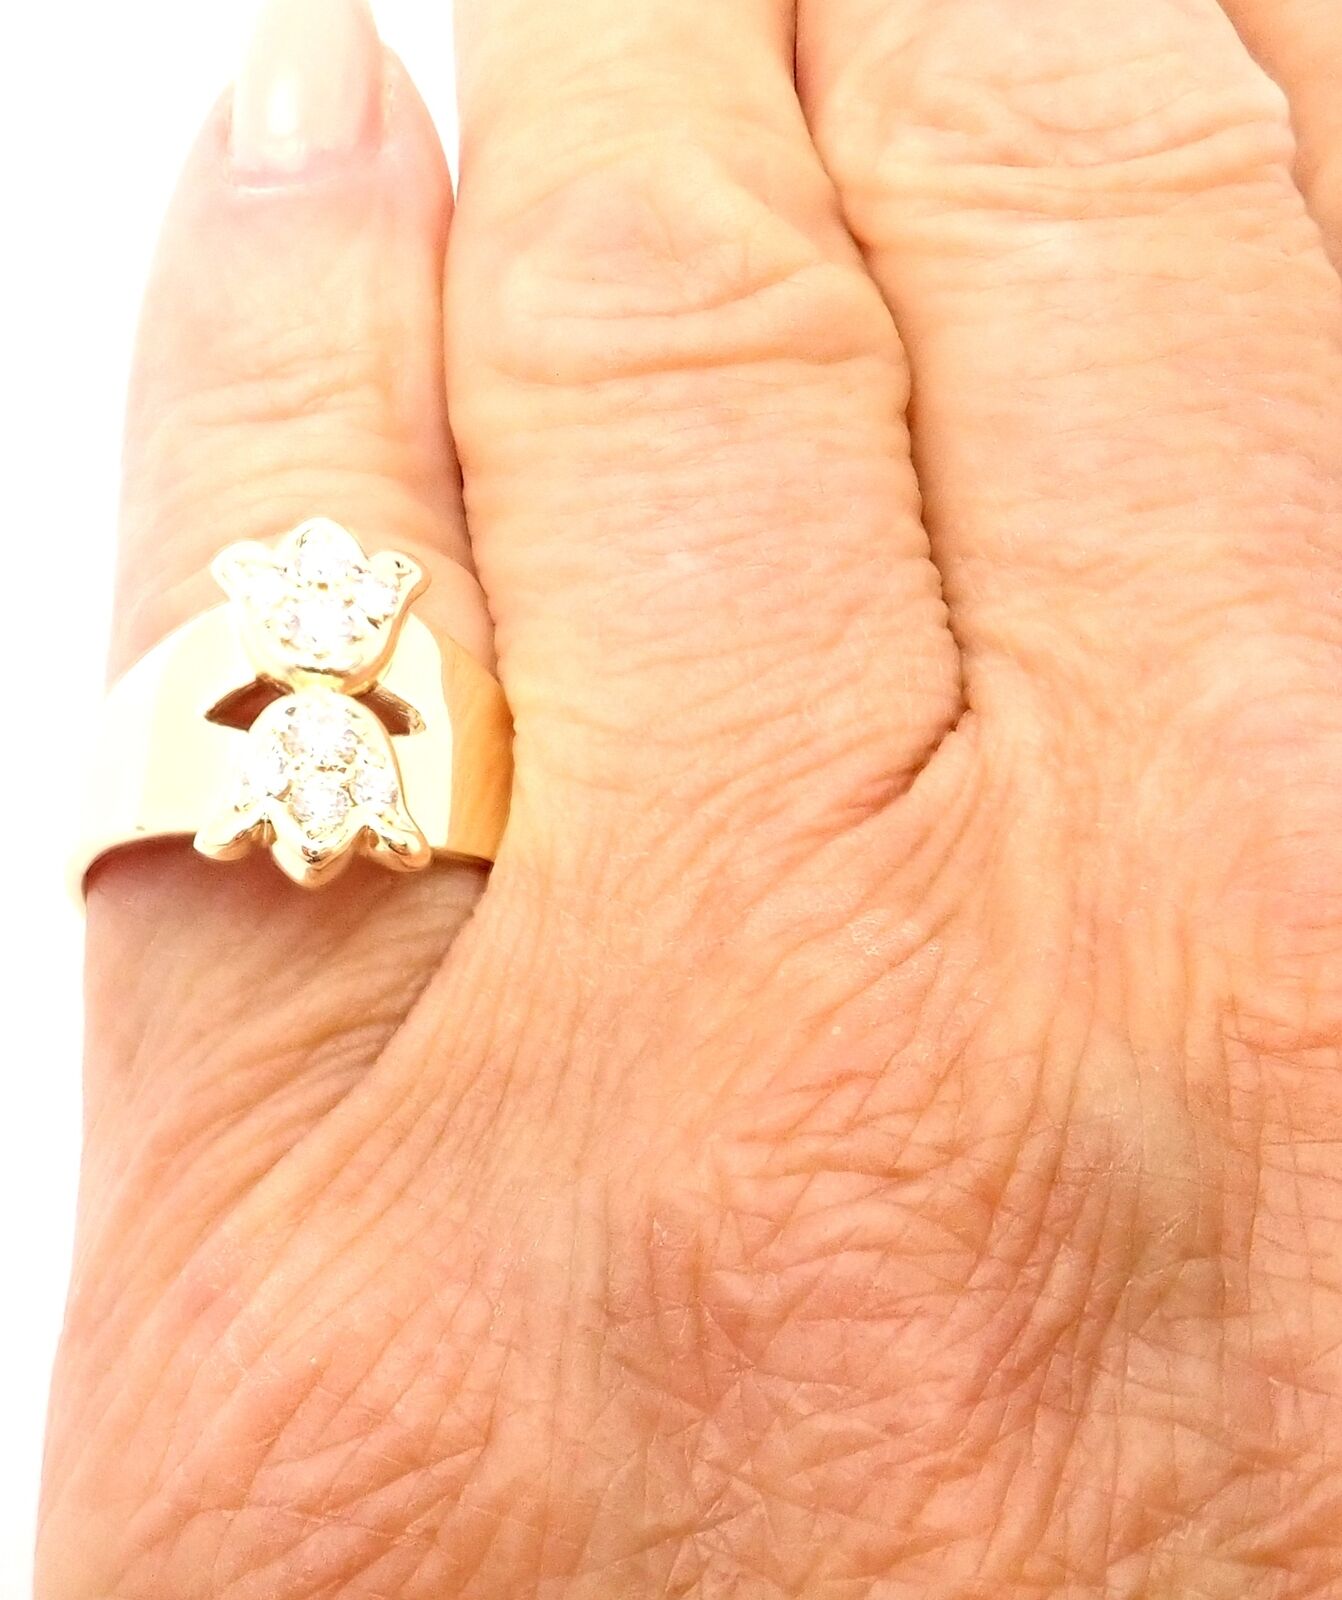 Christian Dior Jewelry & Watches:Fine Jewelry:Rings Rare! Authentic Christian Dior 18k Yellow Gold Diamond Flower Tulip Band Ring